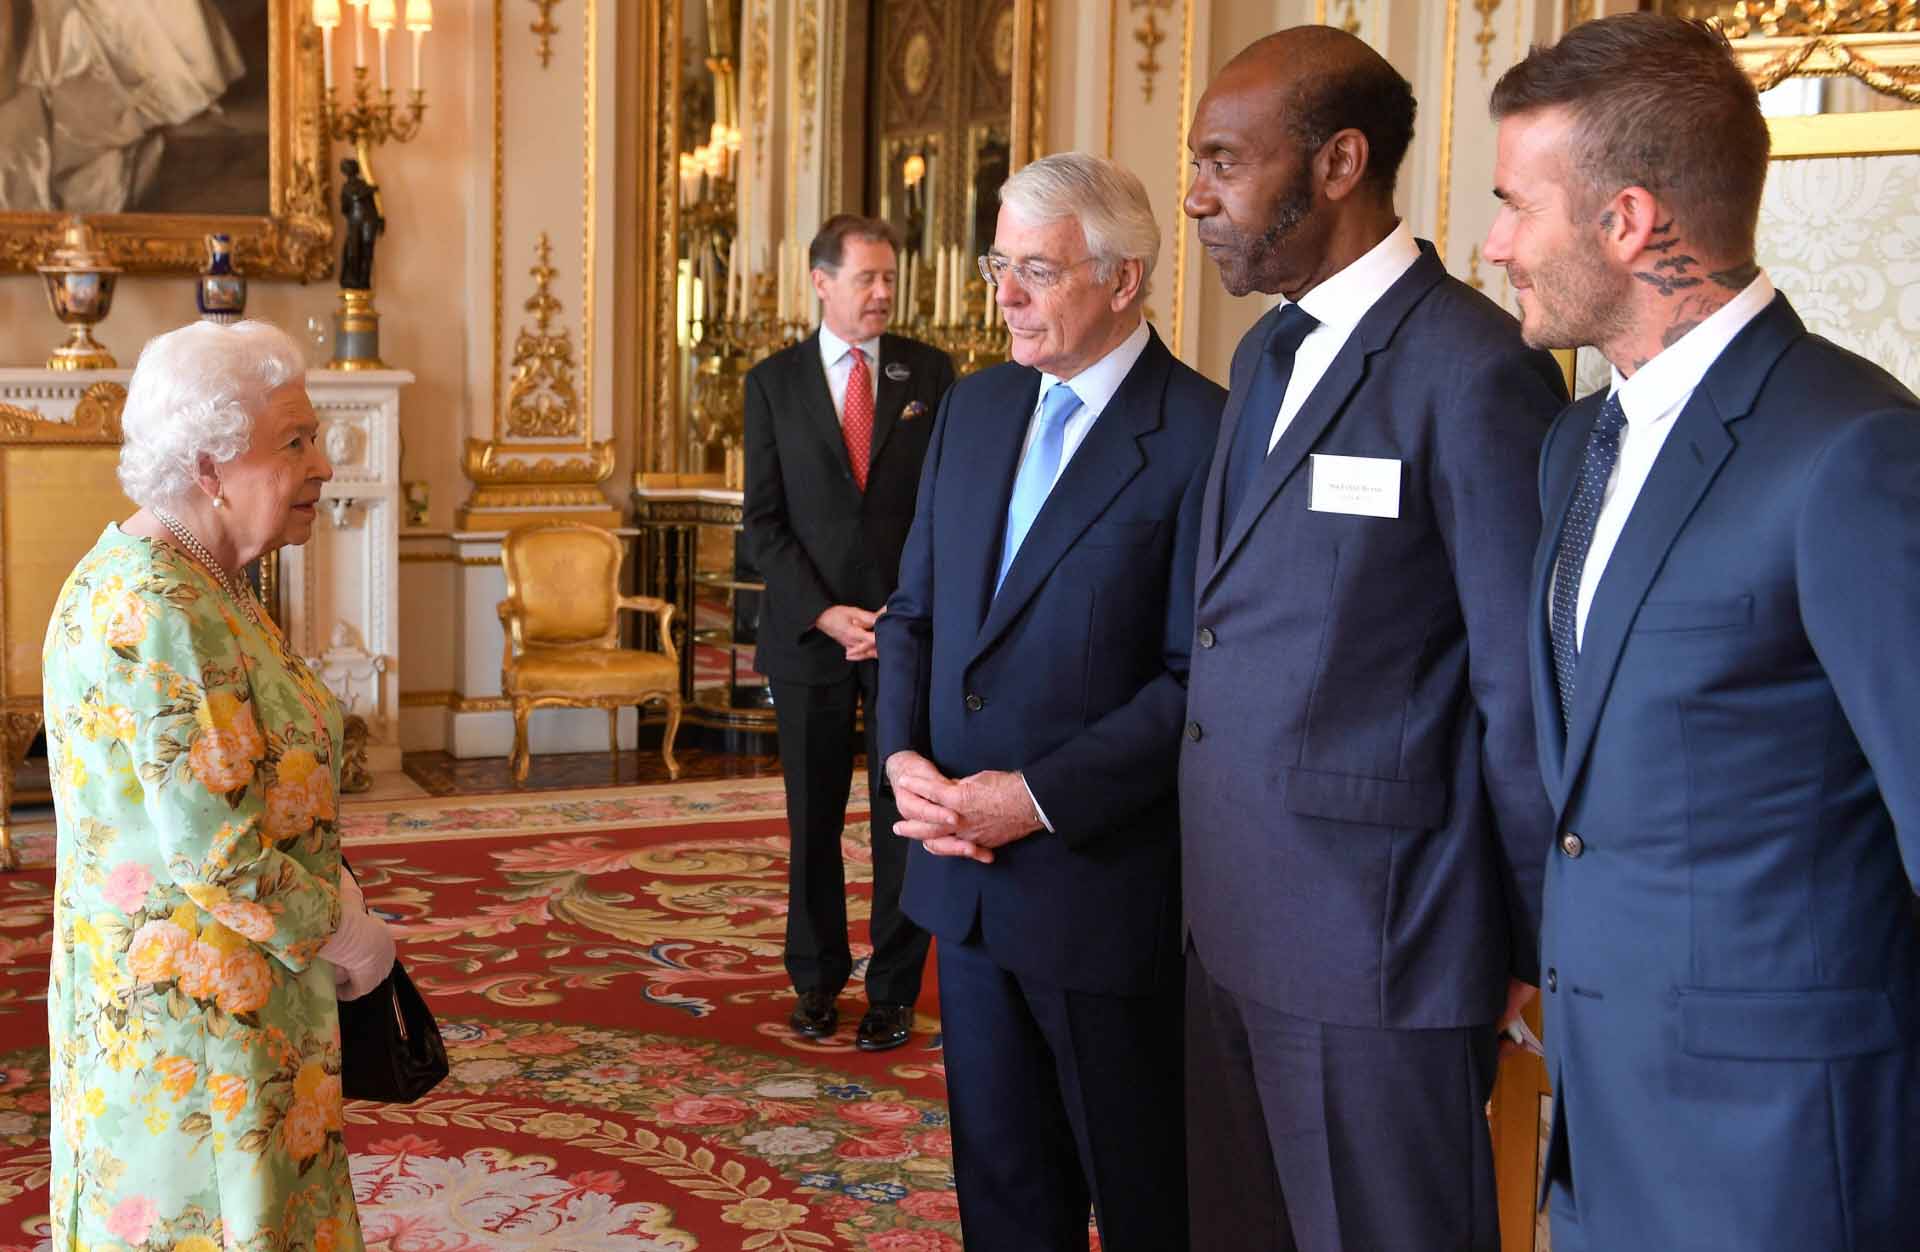 Queen Elizabeth II meets (left to right) Sir John Major, Sir Lenny Henry and David Beckham attend the Queen’s Young Leaders Awards ceremony at BuckinghamPalace in London, Tuesday, June 26, 2018.  *** Local Caption *** .